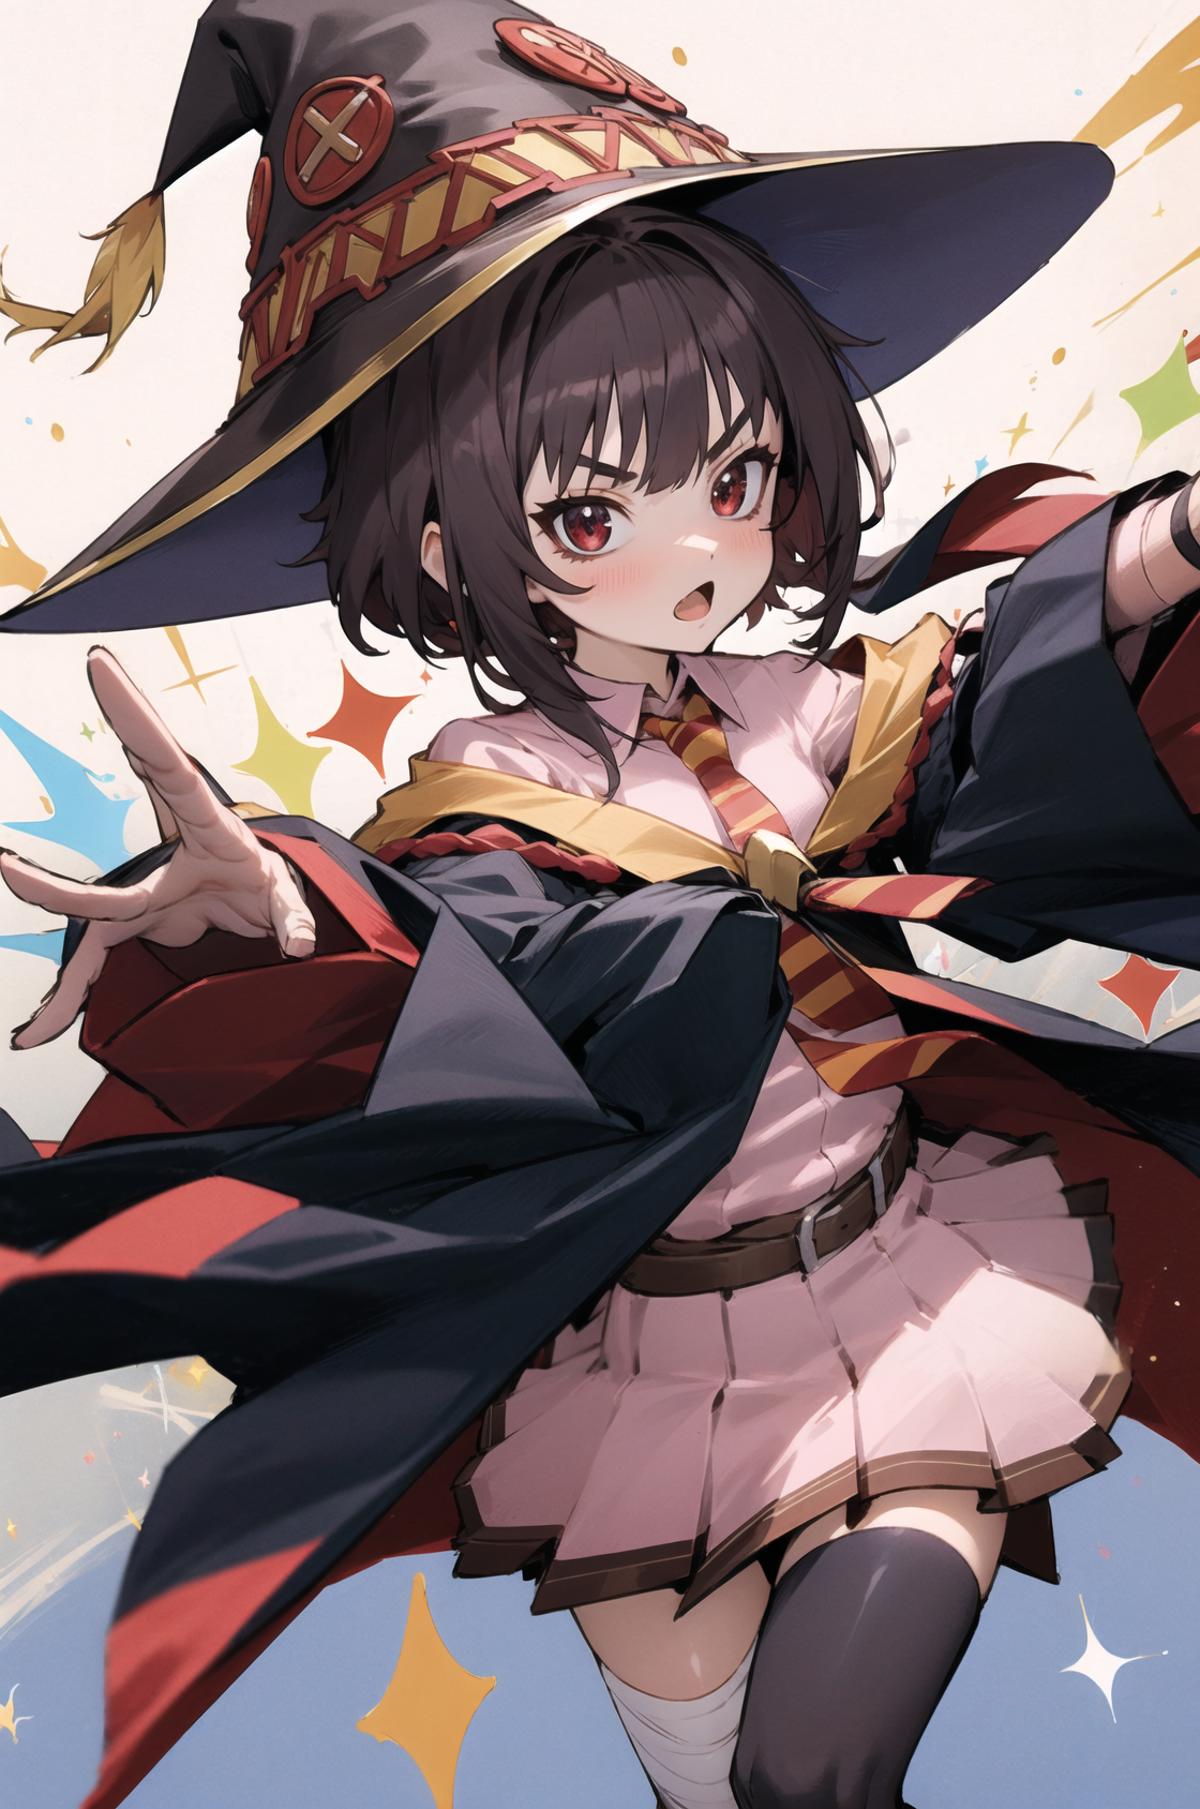 Megumin (Konosuba) - Highly customizable, 4 outfits image by Poiuytrezay